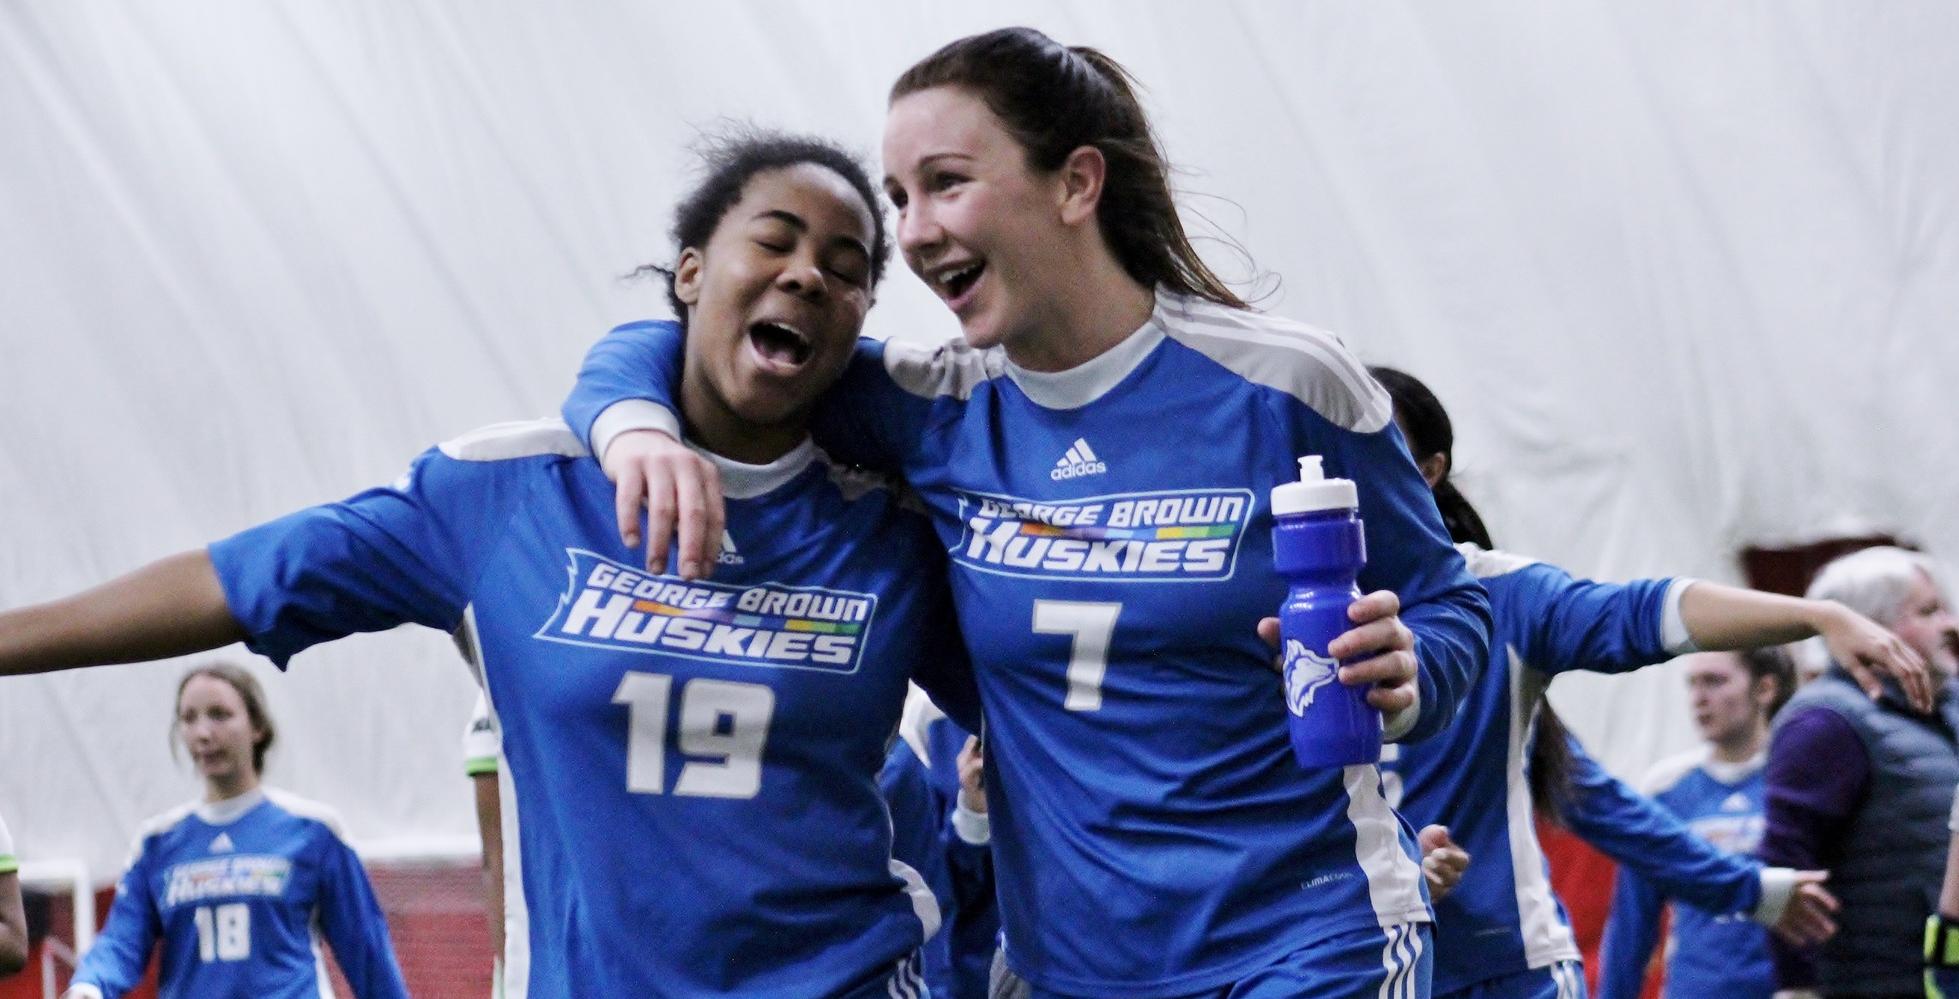 GEORGE BROWN INDOOR SOCCER GOES TWO FOR TWO AT REGIONALS